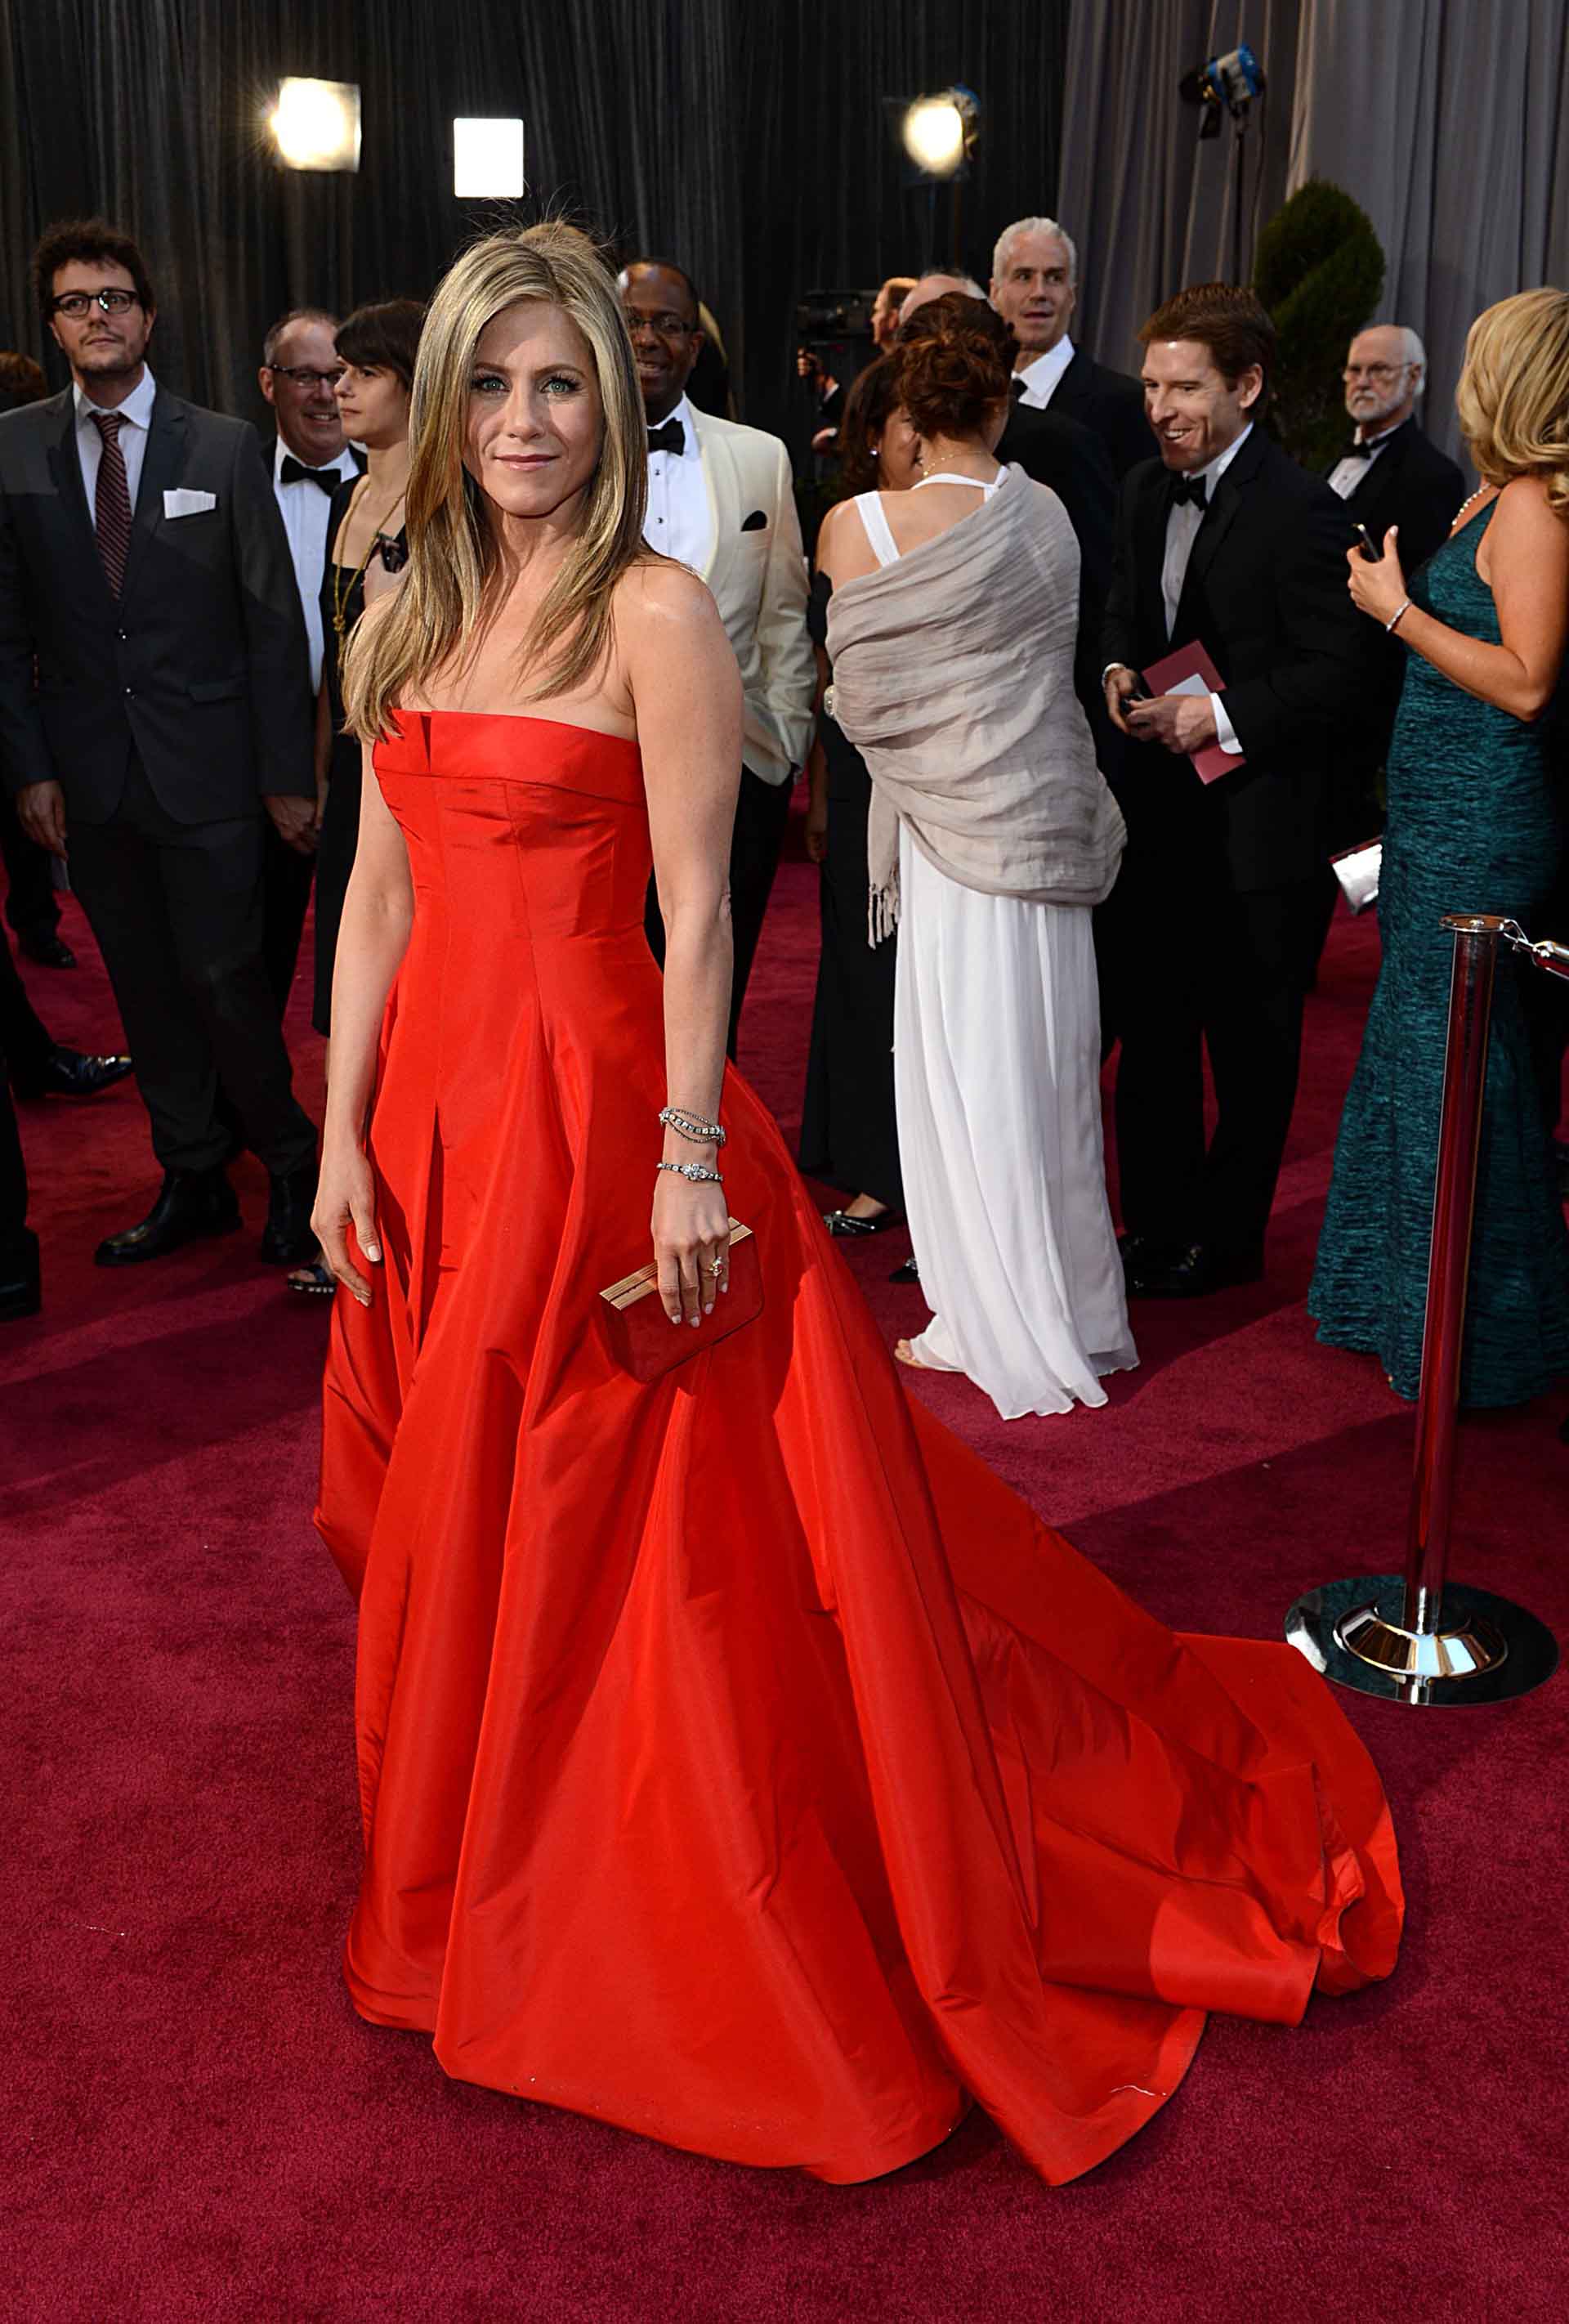 Actress Jennifer Aniston arriving for the 85th Academy Awards " The Oscars " on Sunday Feb. 24, 2013, in Los Angeles.